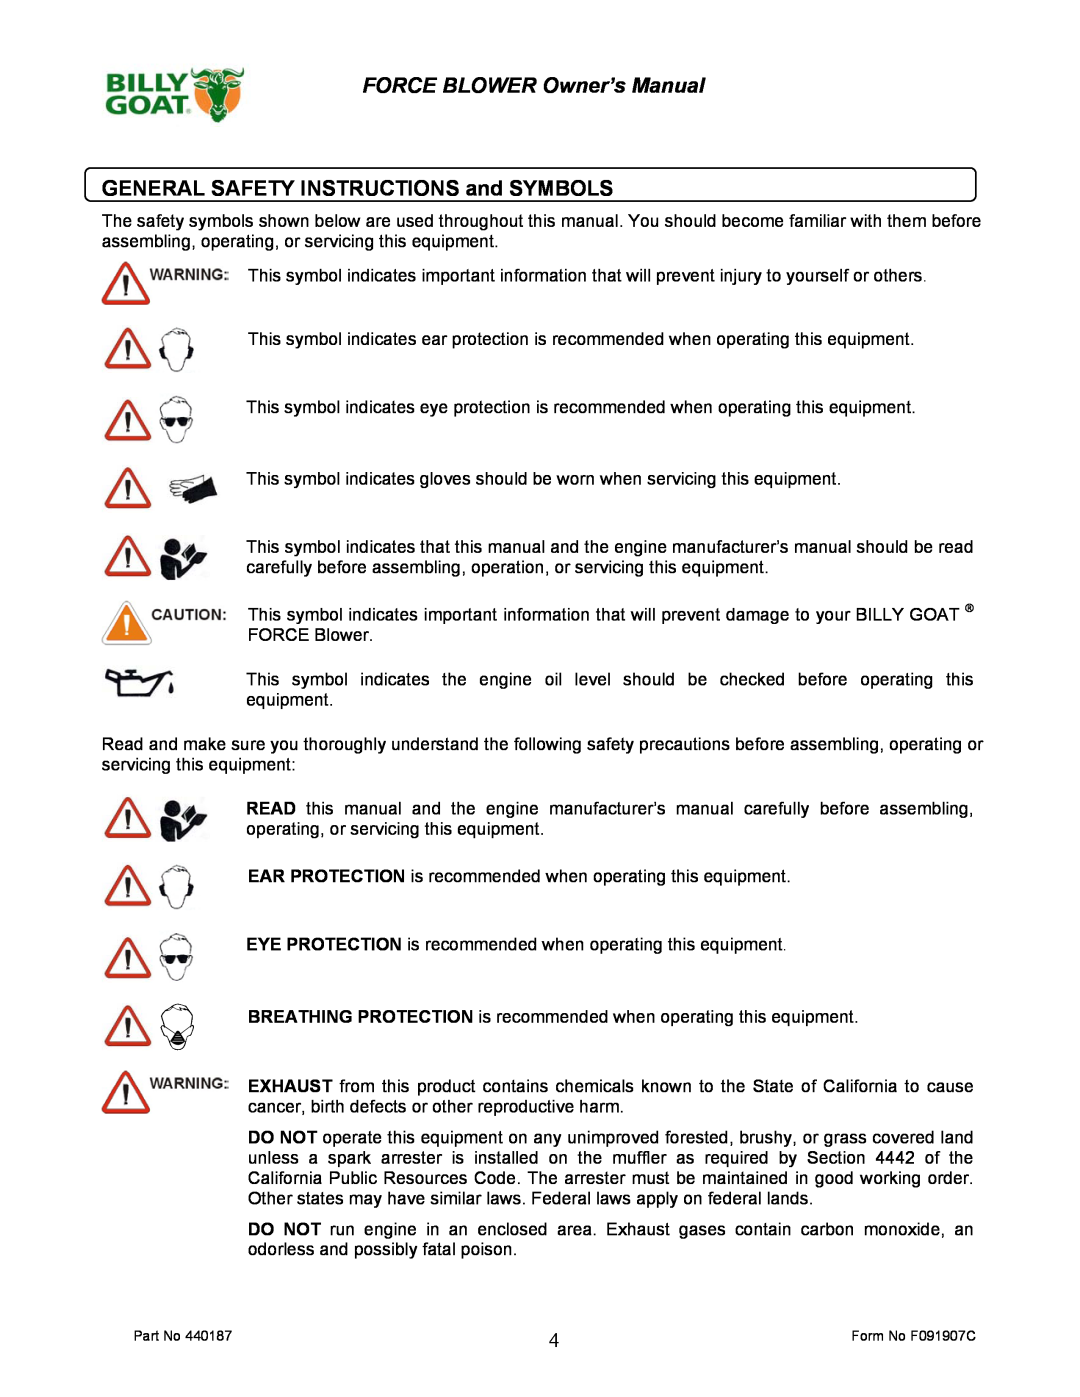 Billy Goat F800 owner manual GENERAL SAFETY INSTRUCTIONS and SYMBOLS 